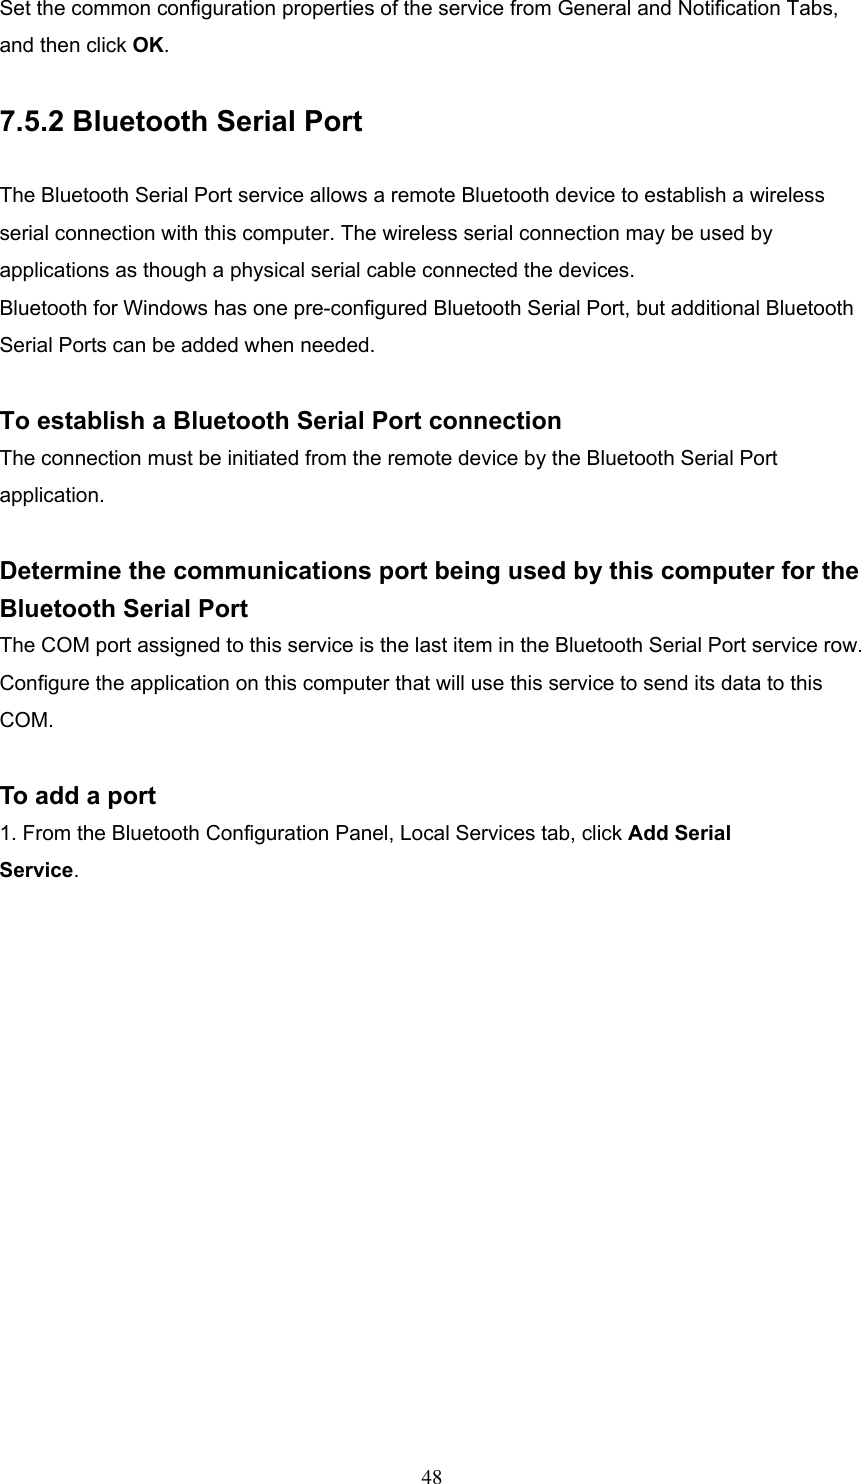 Set the common configuration properties of the service from General and Notification Tabs, and then click OK.  7.5.2 Bluetooth Serial Port  The Bluetooth Serial Port service allows a remote Bluetooth device to establish a wireless serial connection with this computer. The wireless serial connection may be used by applications as though a physical serial cable connected the devices. Bluetooth for Windows has one pre-configured Bluetooth Serial Port, but additional Bluetooth Serial Ports can be added when needed.  To establish a Bluetooth Serial Port connection The connection must be initiated from the remote device by the Bluetooth Serial Port application.  Determine the communications port being used by this computer for the Bluetooth Serial Port The COM port assigned to this service is the last item in the Bluetooth Serial Port service row. Configure the application on this computer that will use this service to send its data to this COM.  To add a port 1. From the Bluetooth Configuration Panel, Local Services tab, click Add Serial Service.  48 